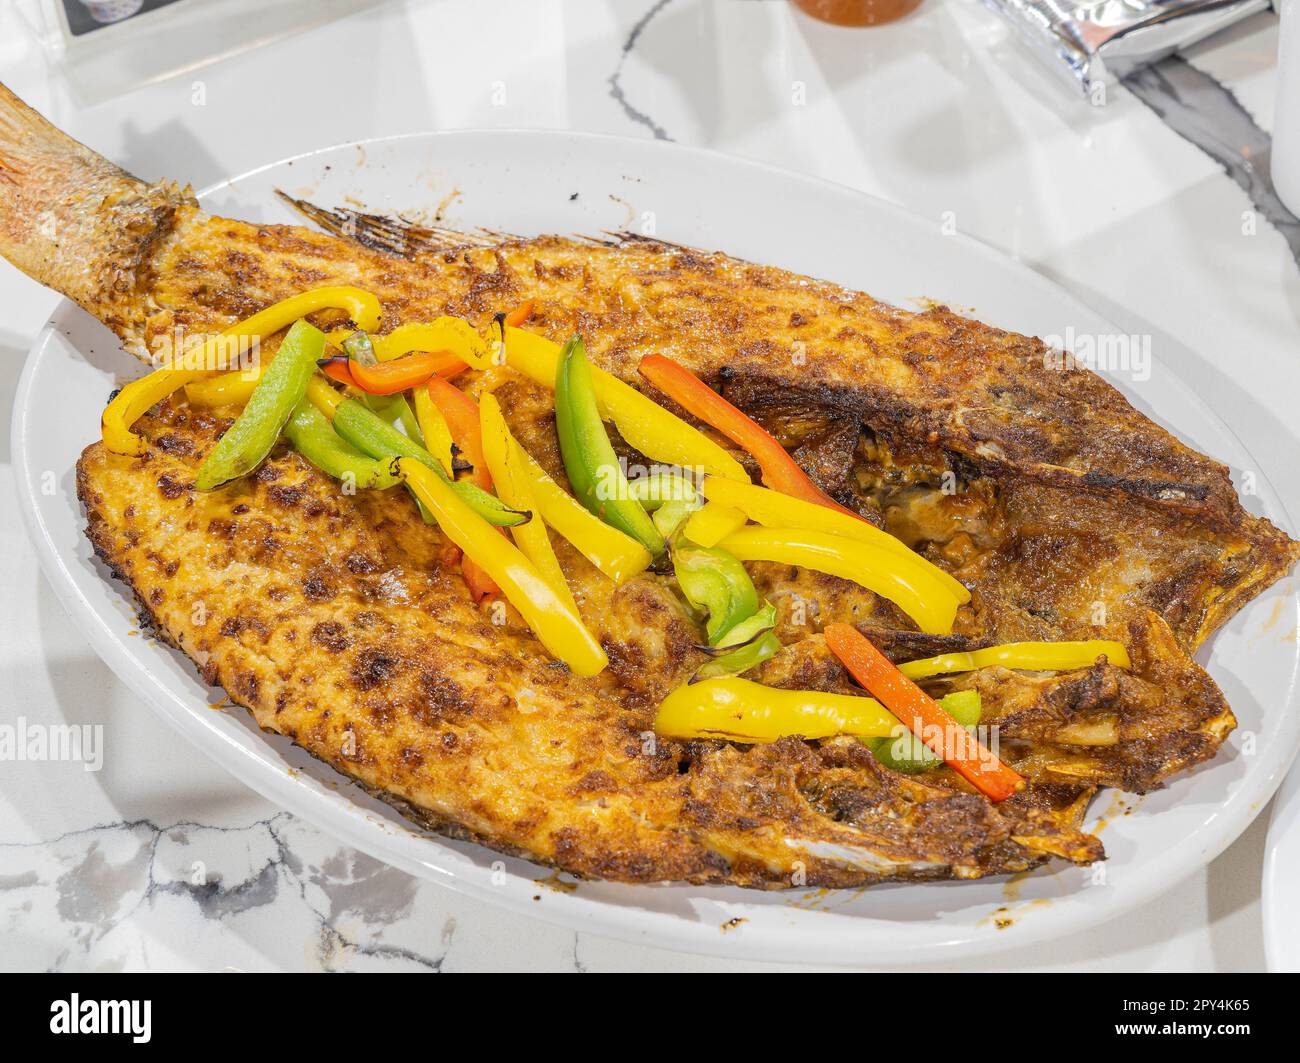 Close up shot of Mexician style fried fish at Mexico Stock Photo